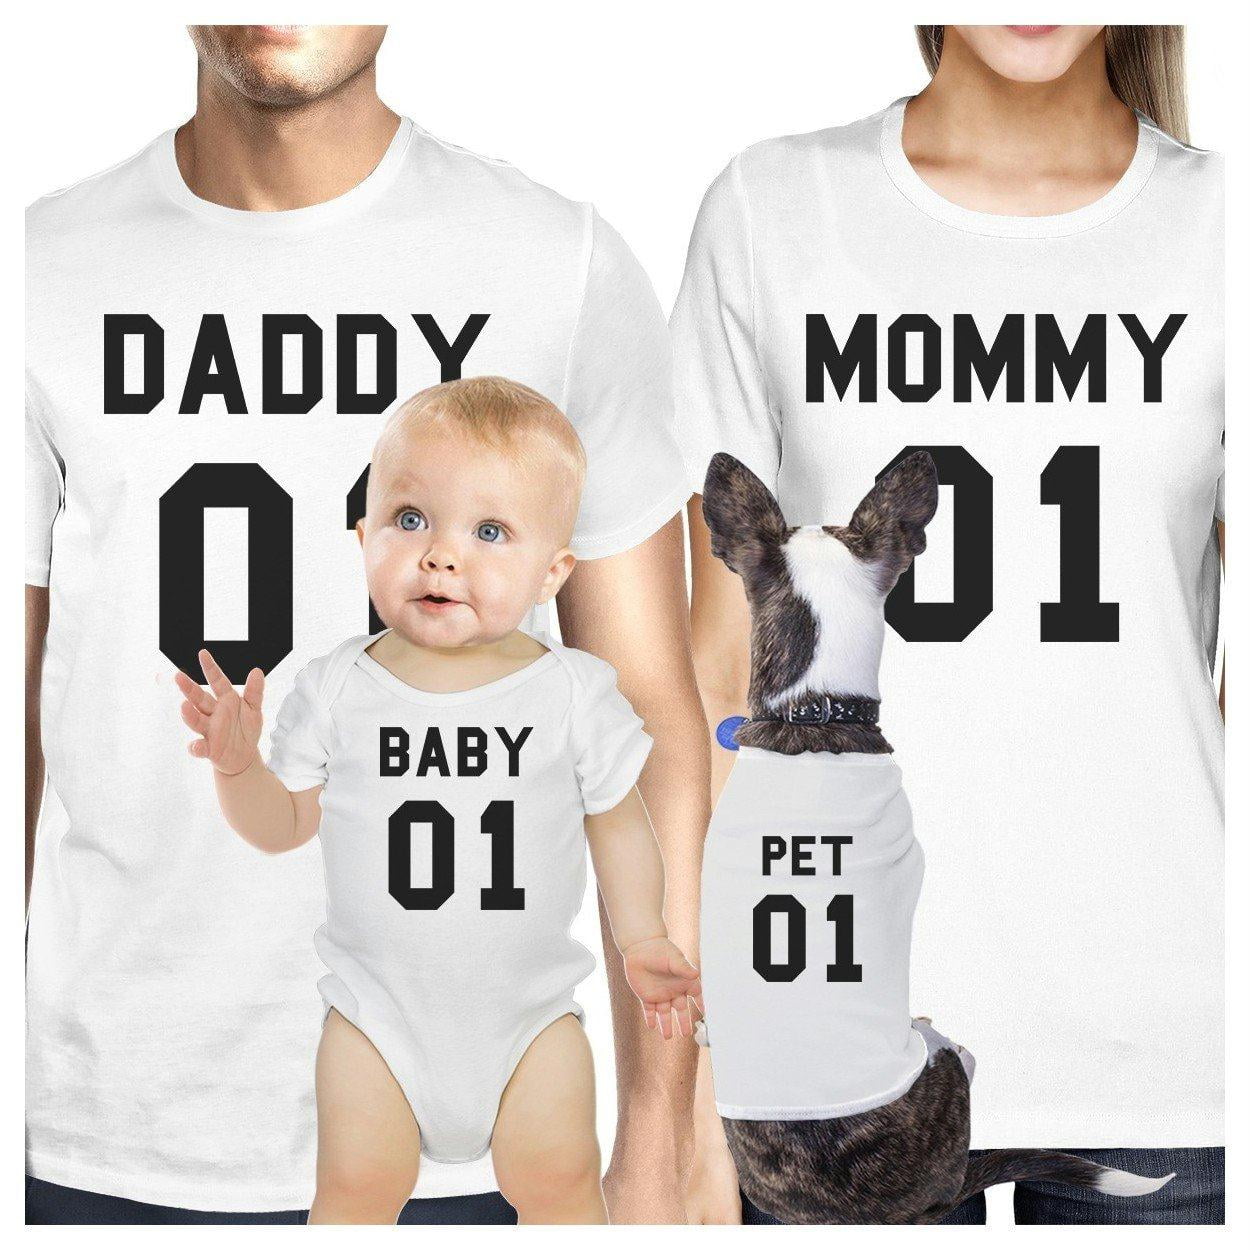 matching shirts for mom son and daughter